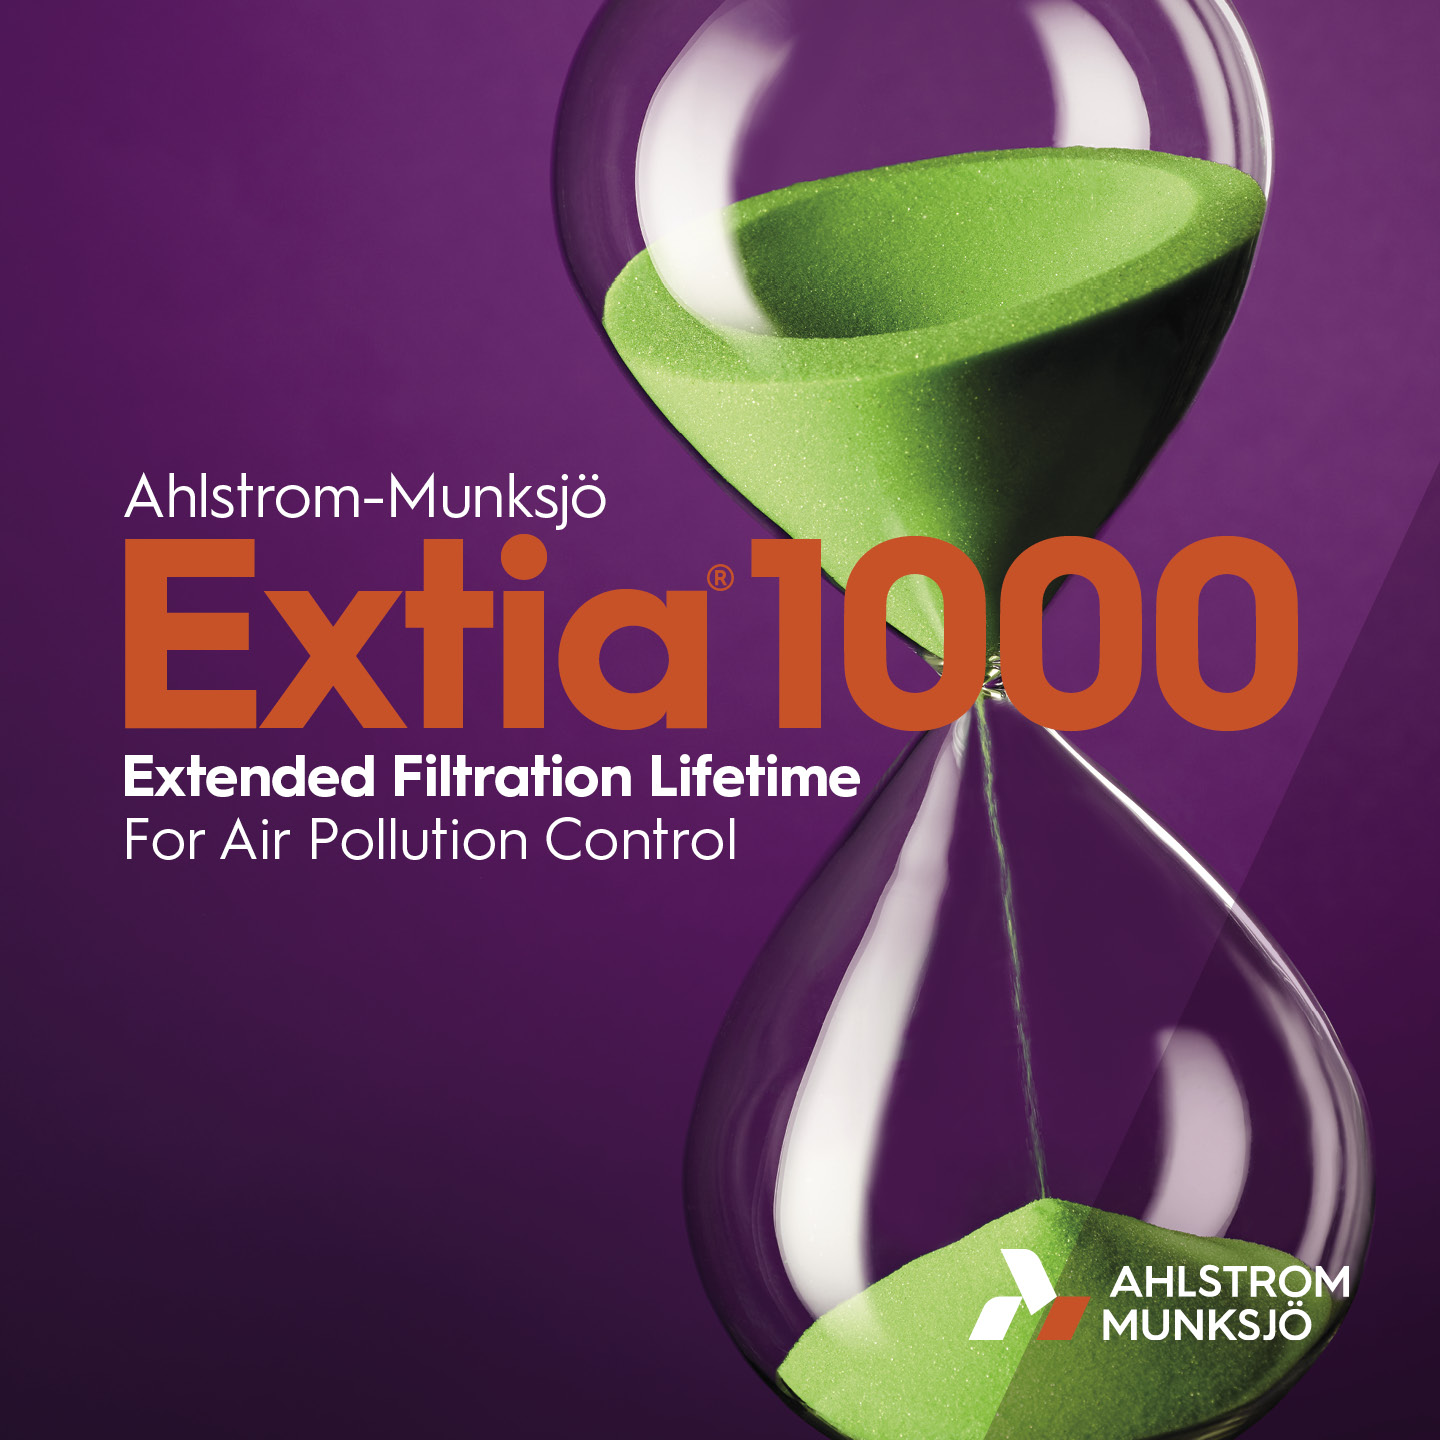 The Extia 1000 is designed to extend filtration lifetime by more than 40%.